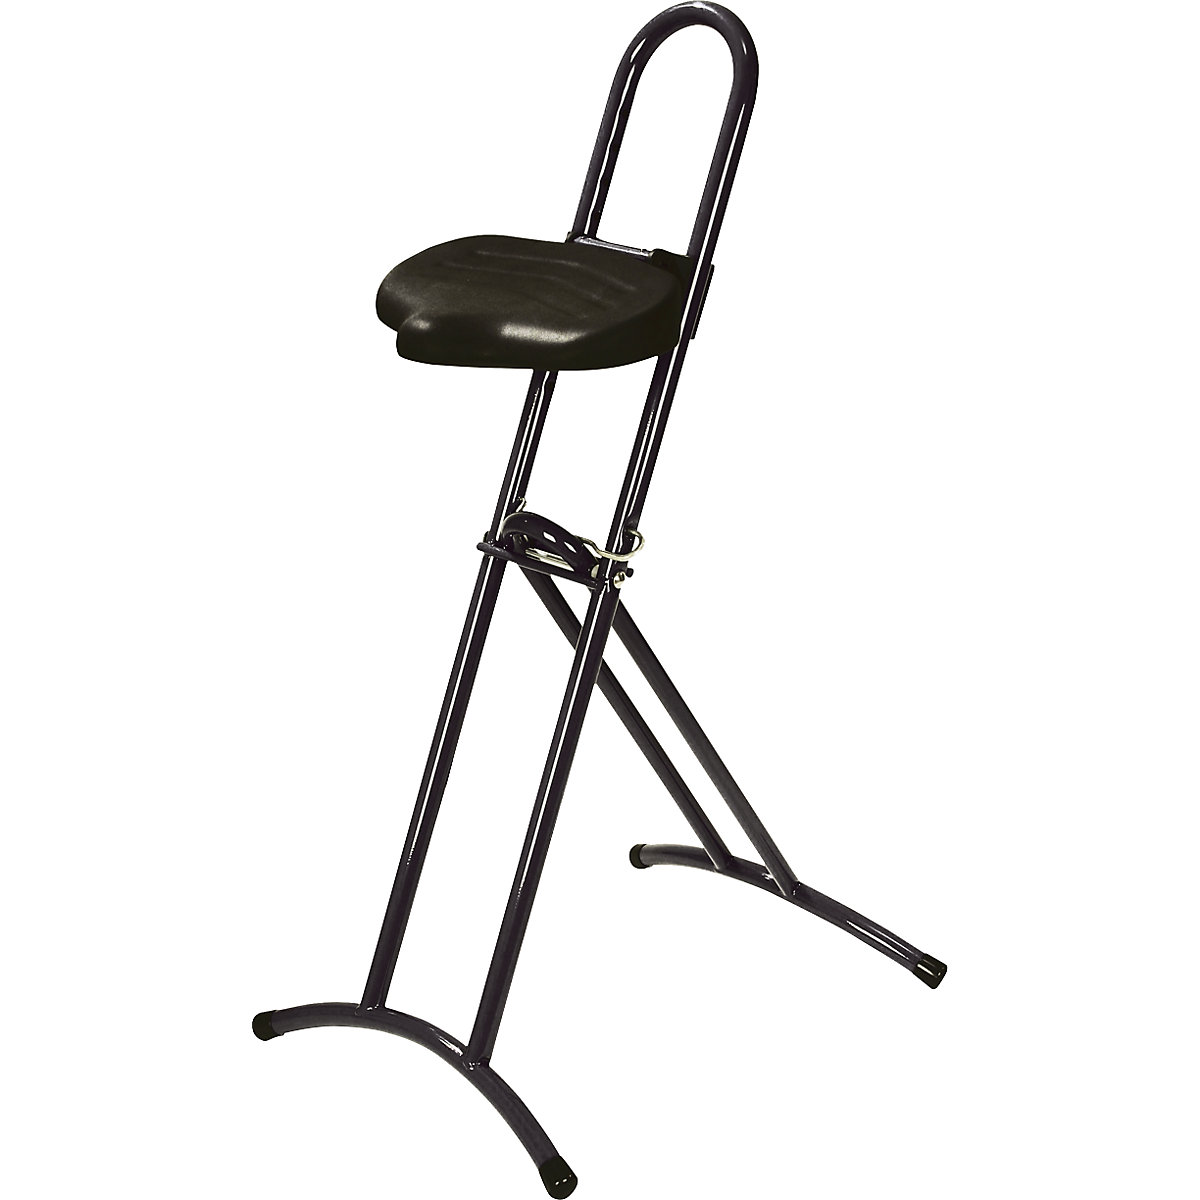 Anti-fatigue stool with rotating seat